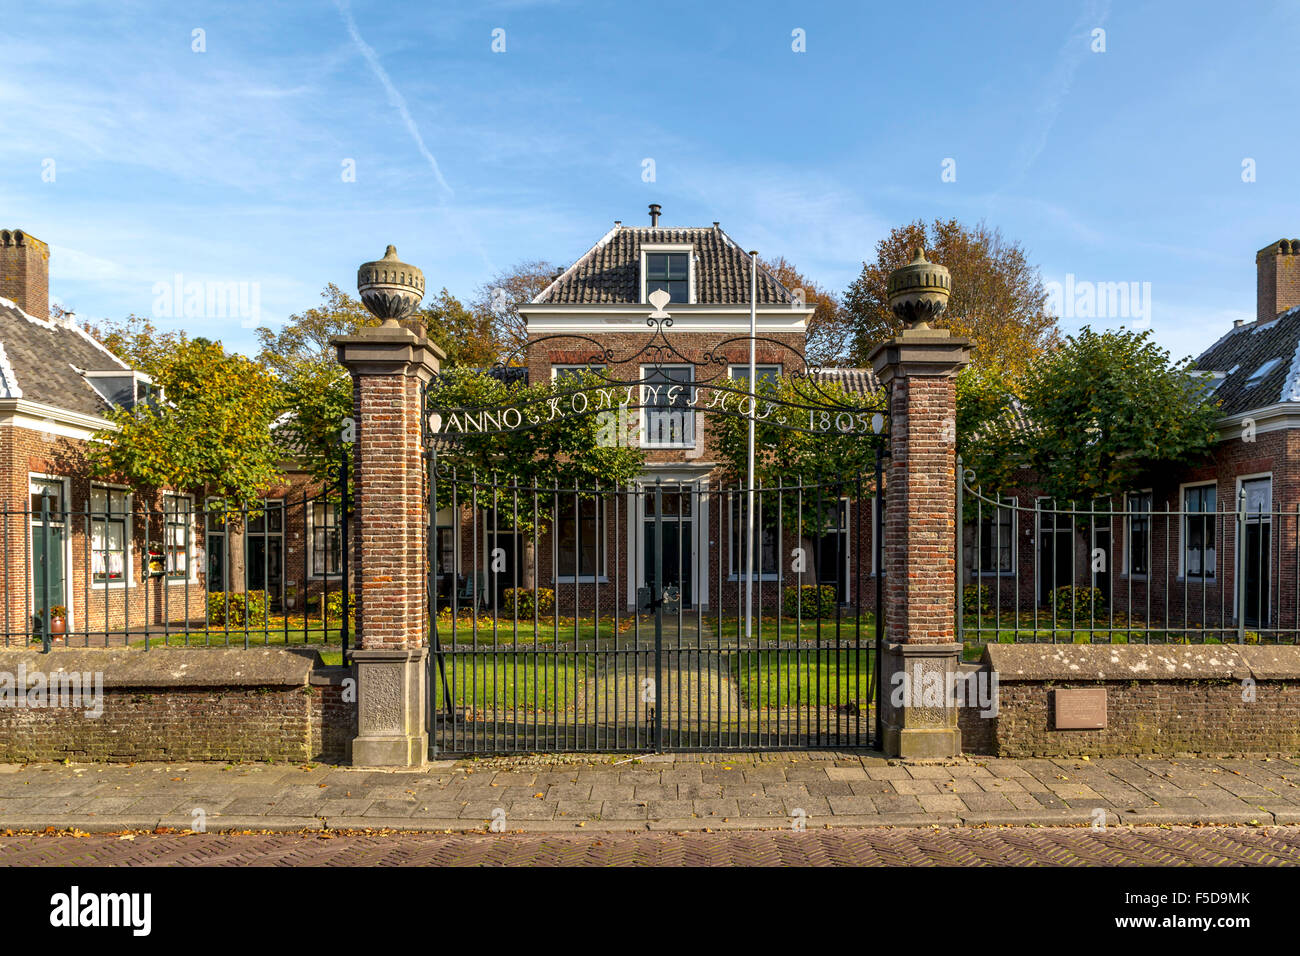 Koningshof or King's Court, the former homestead of Carolus Boers. A courtyard dating from 1805, built in a U-shape around yard. Stock Photo